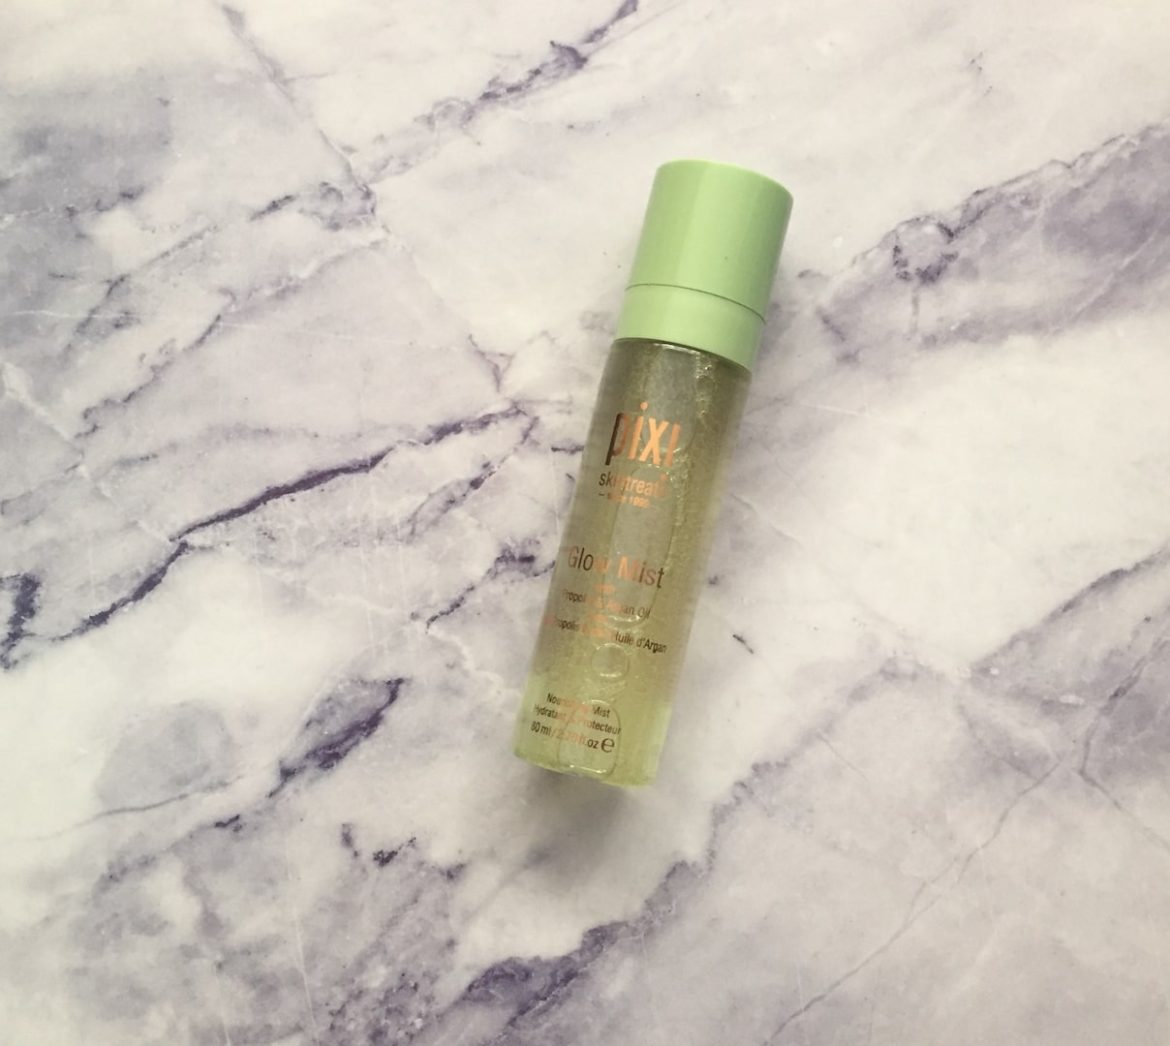 Pixi Beauty Mist Review: Glow Mist and Hydrating Milky Mist - Cecilia's ...